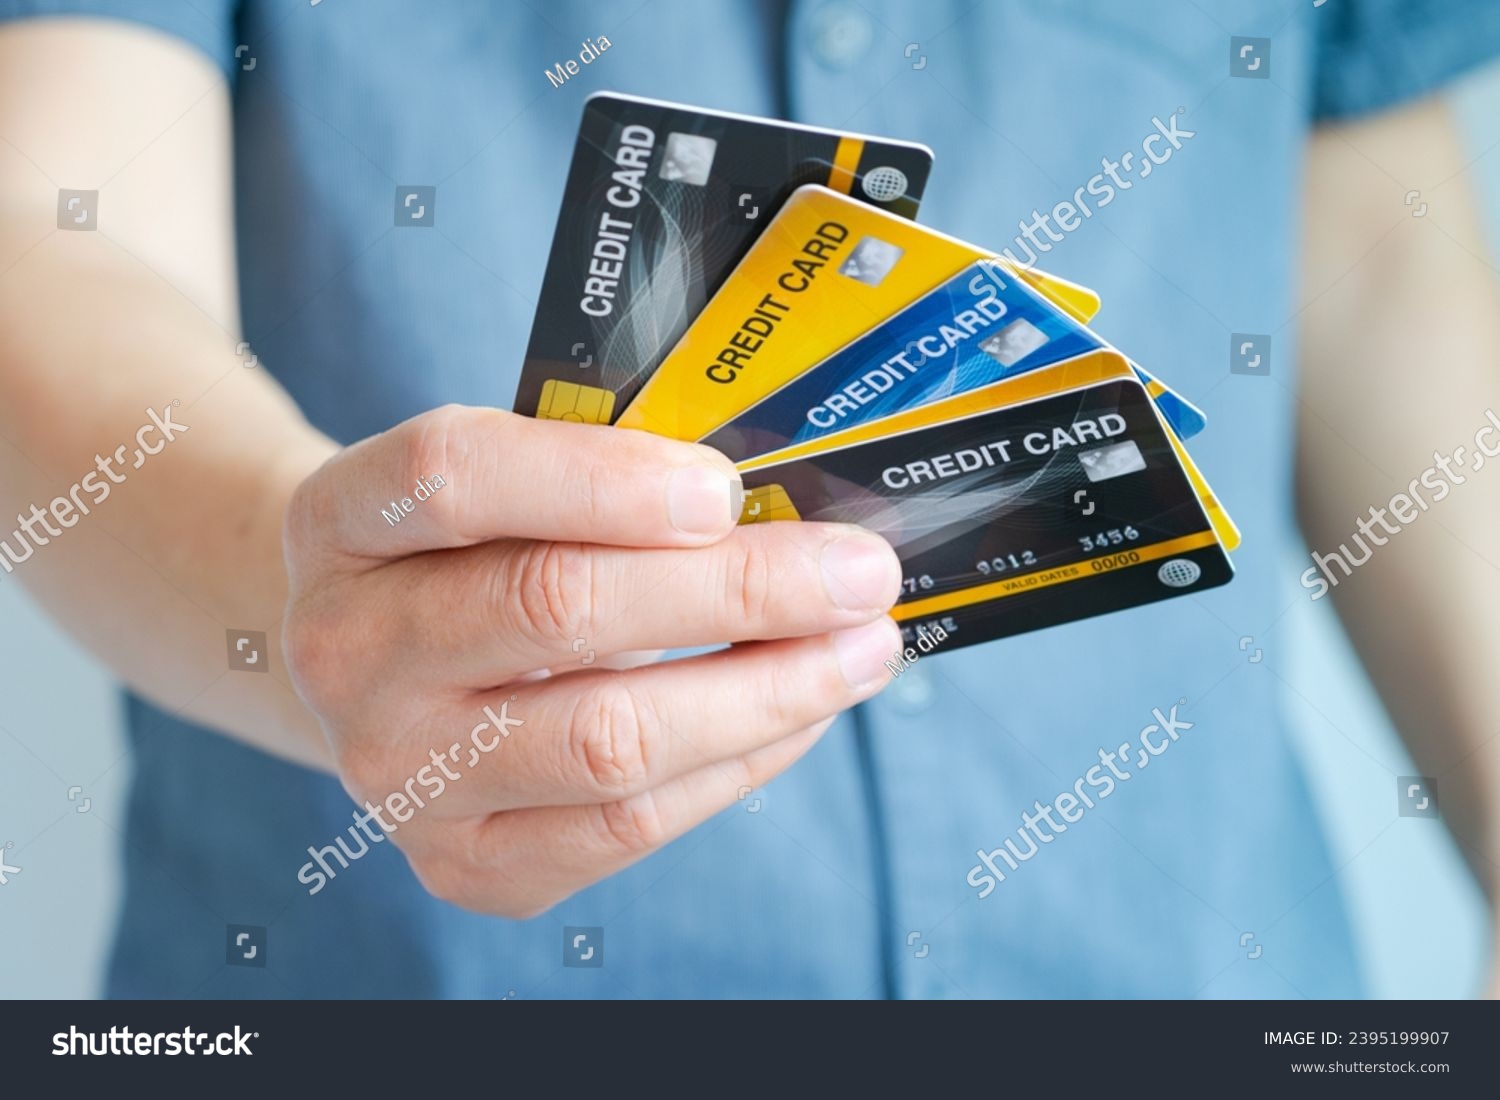 Man holding several credit cards and he is choosing a credit card to pay and spend Payment for goods via credit card. Finance and banking concept. #2395199907